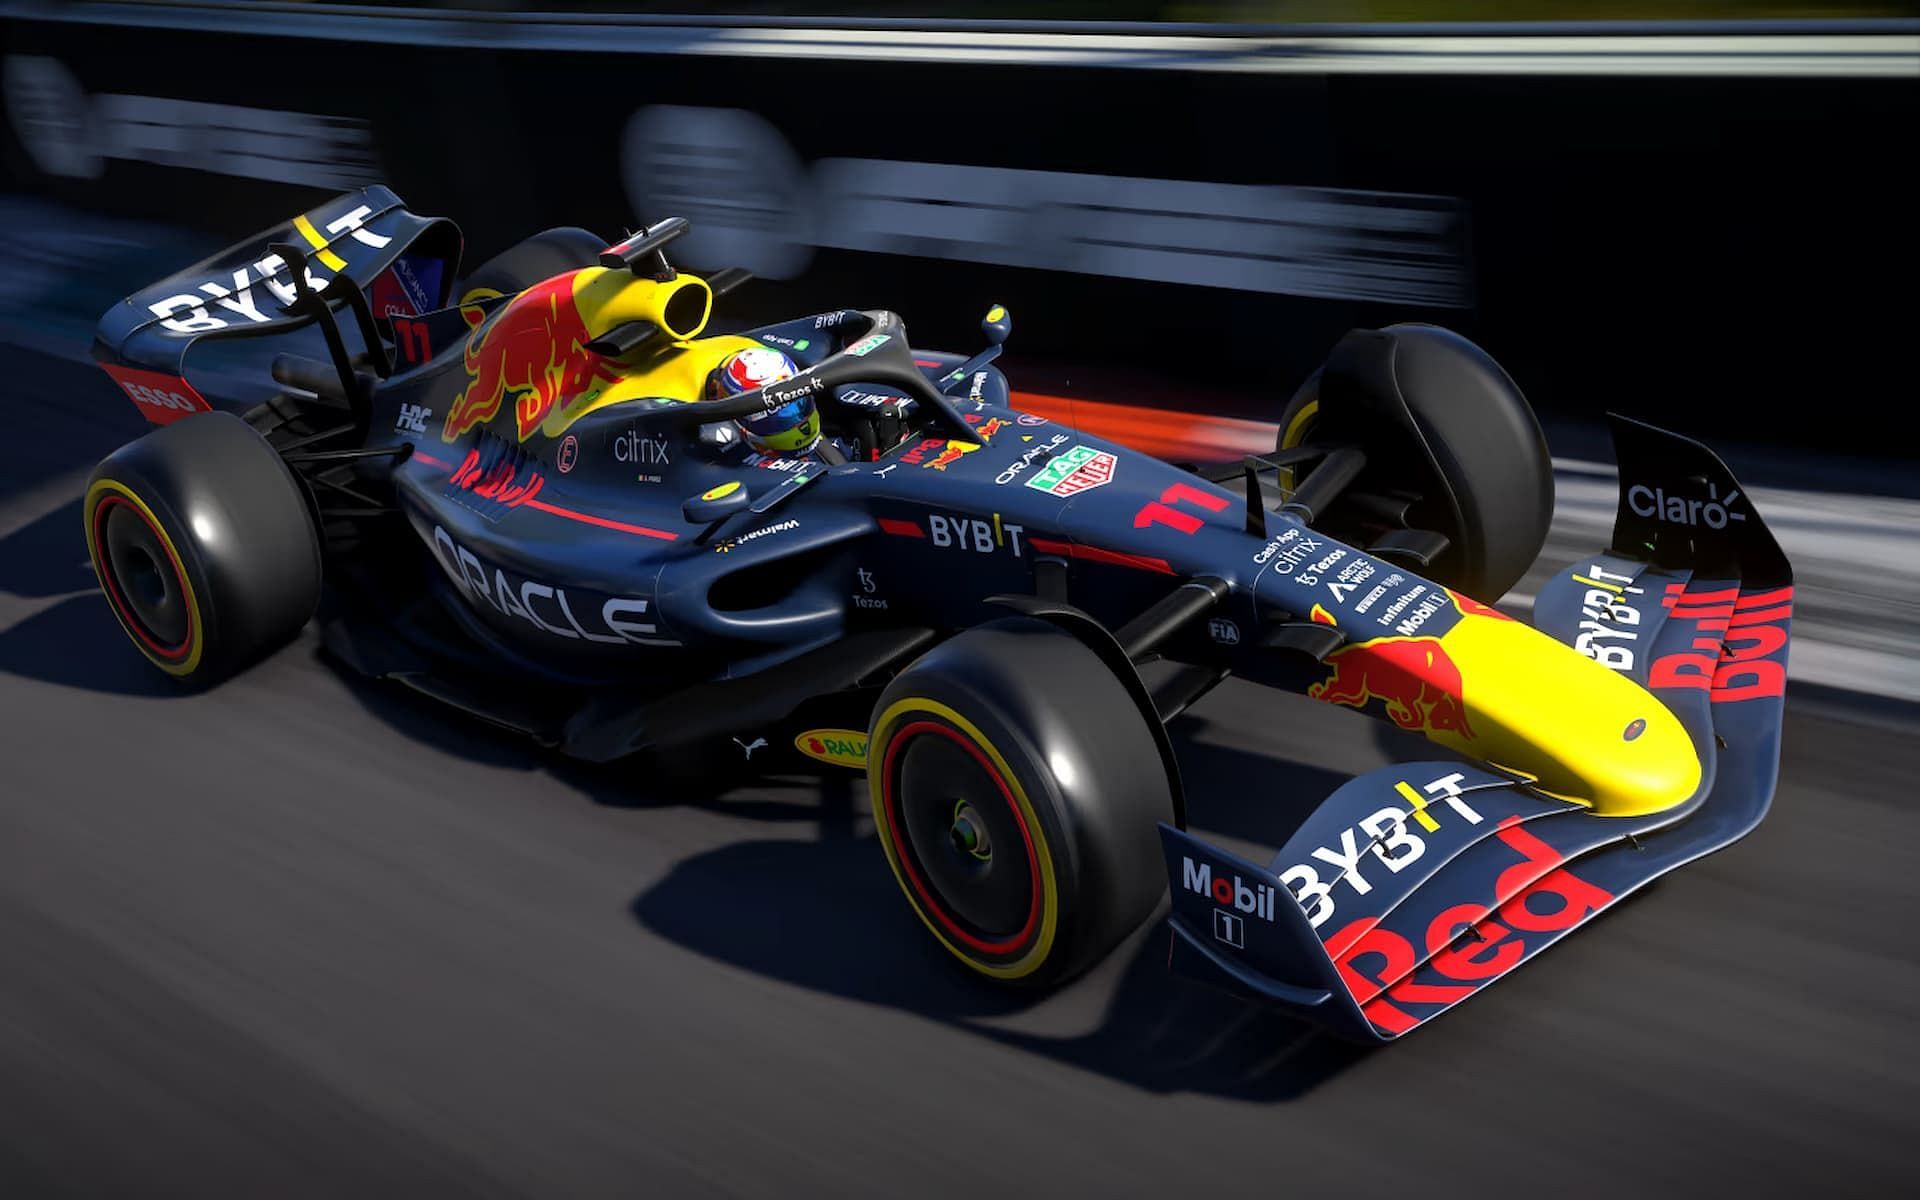 Through practice sessions, F1 22 offers players ample opportunity to gain familiarity with the nuances and turns of each course (Image via Codemasters)